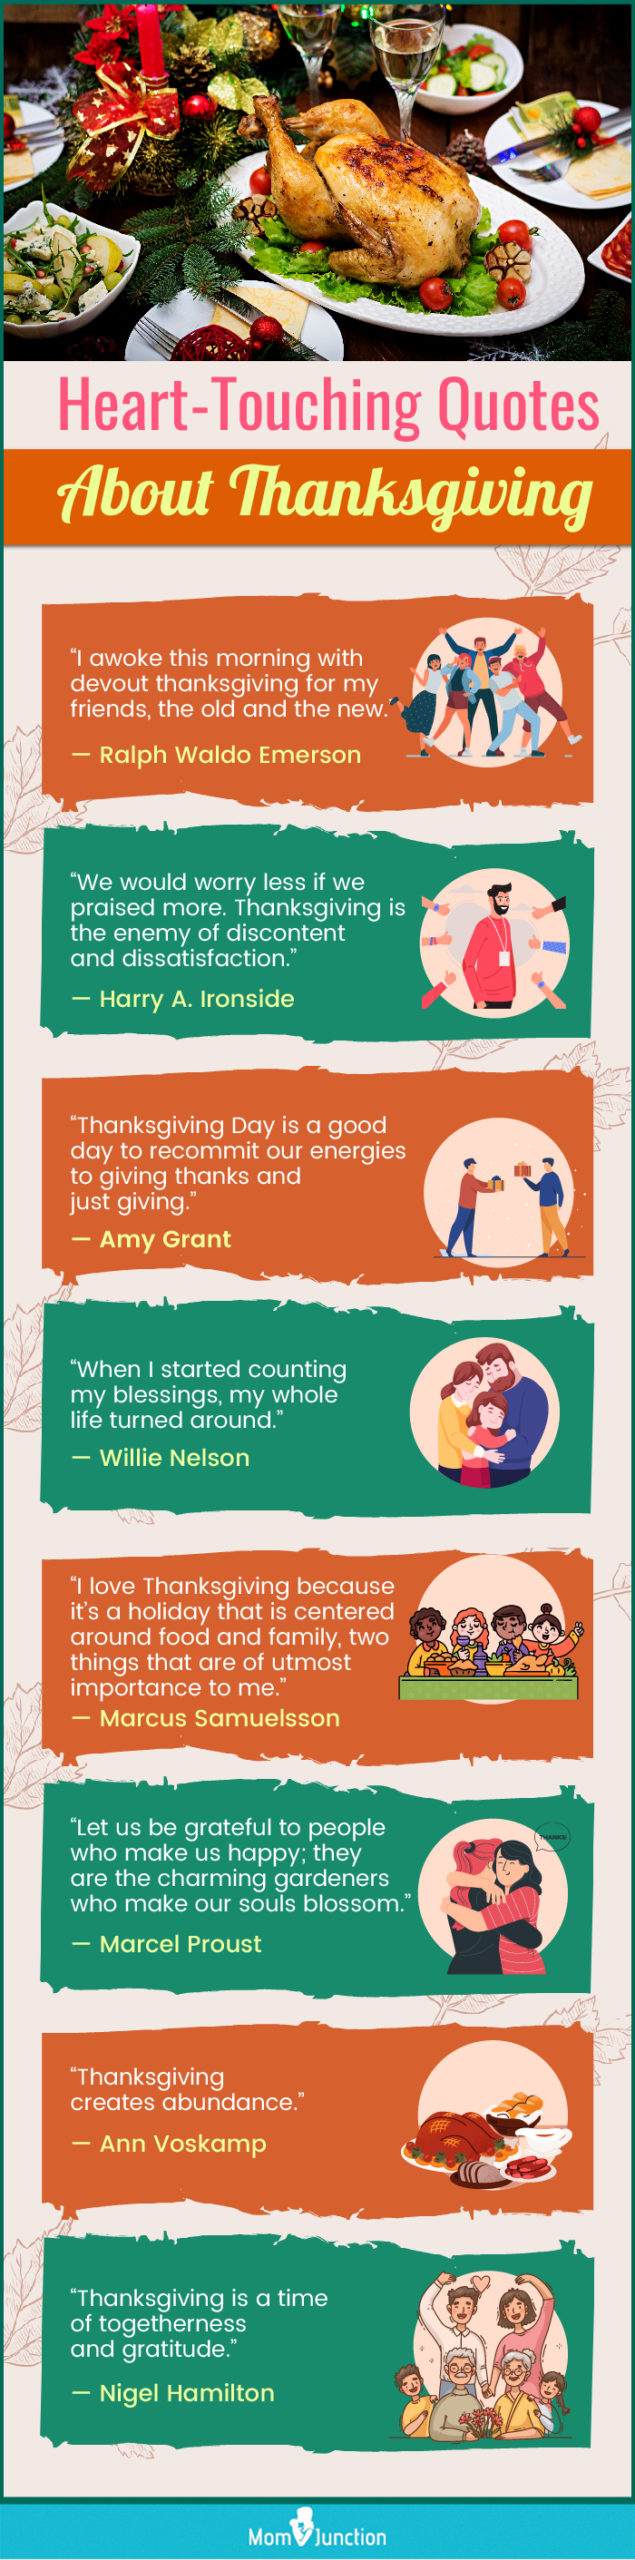 heart touching quotes about thanksgiving (infographic)